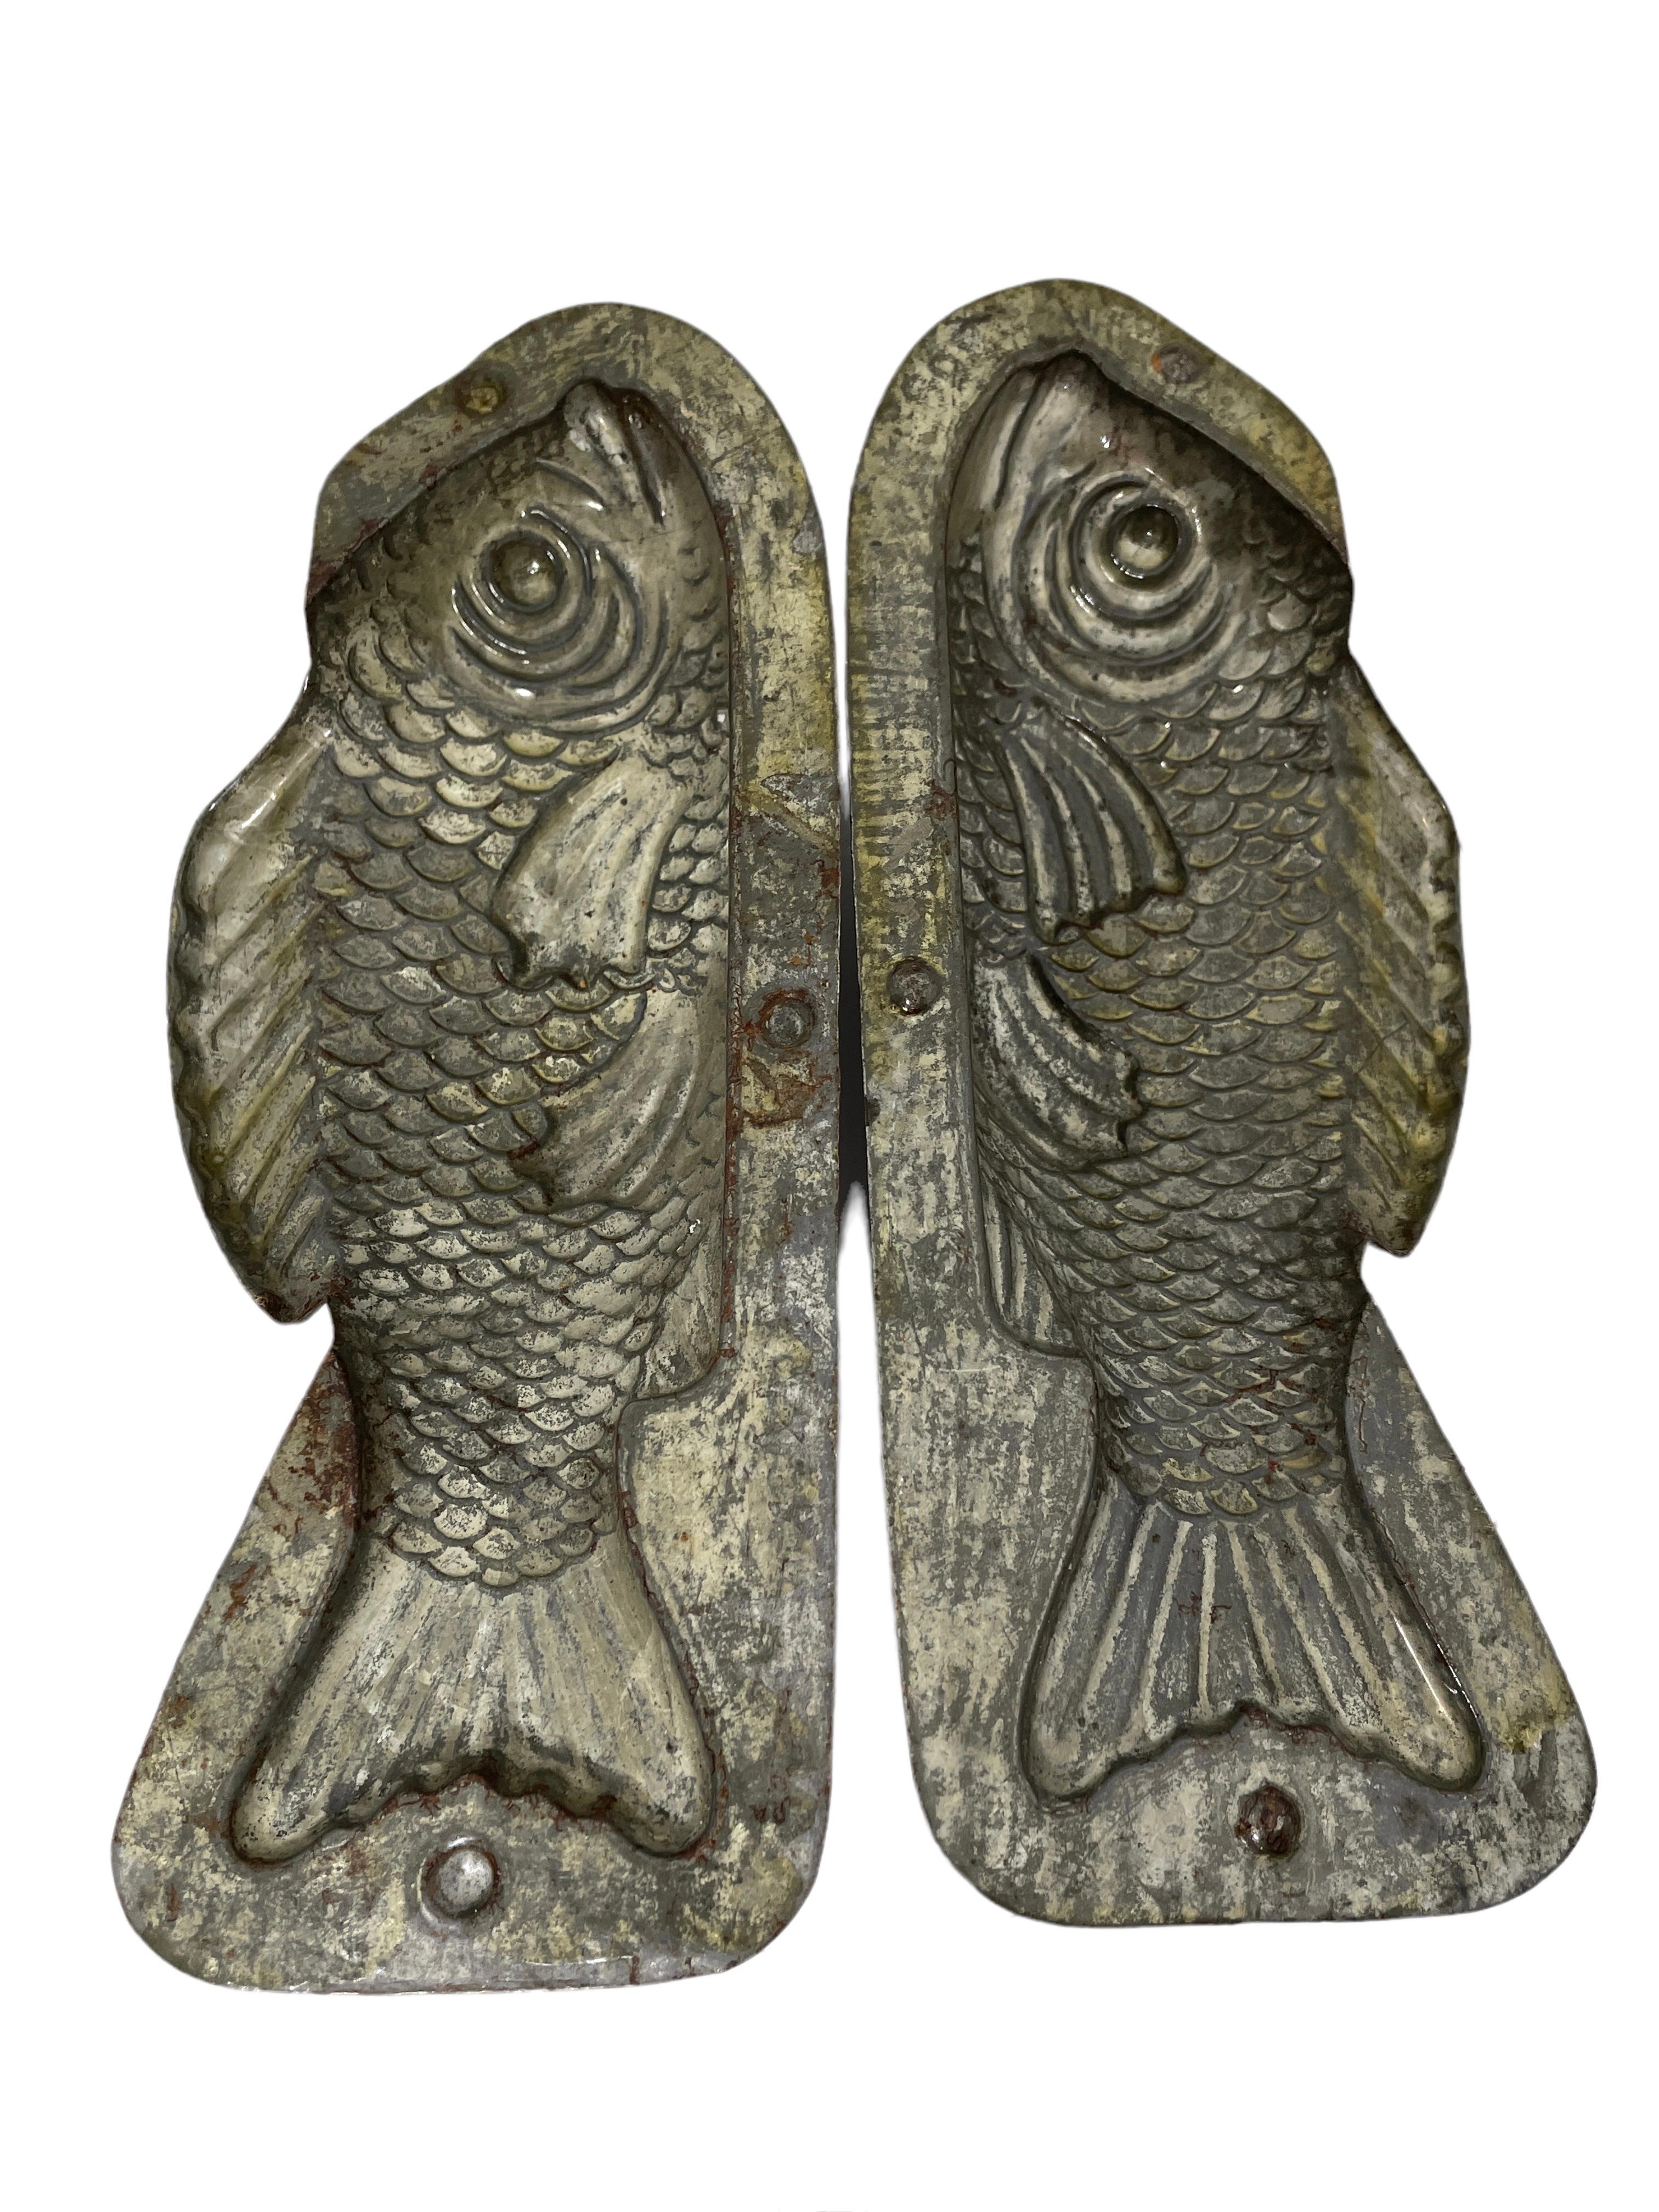 Fish Dolphin Chocolate Mold Antique 1890s, Anton Reiche, Dresden, Germany In Good Condition For Sale In Nuernberg, DE